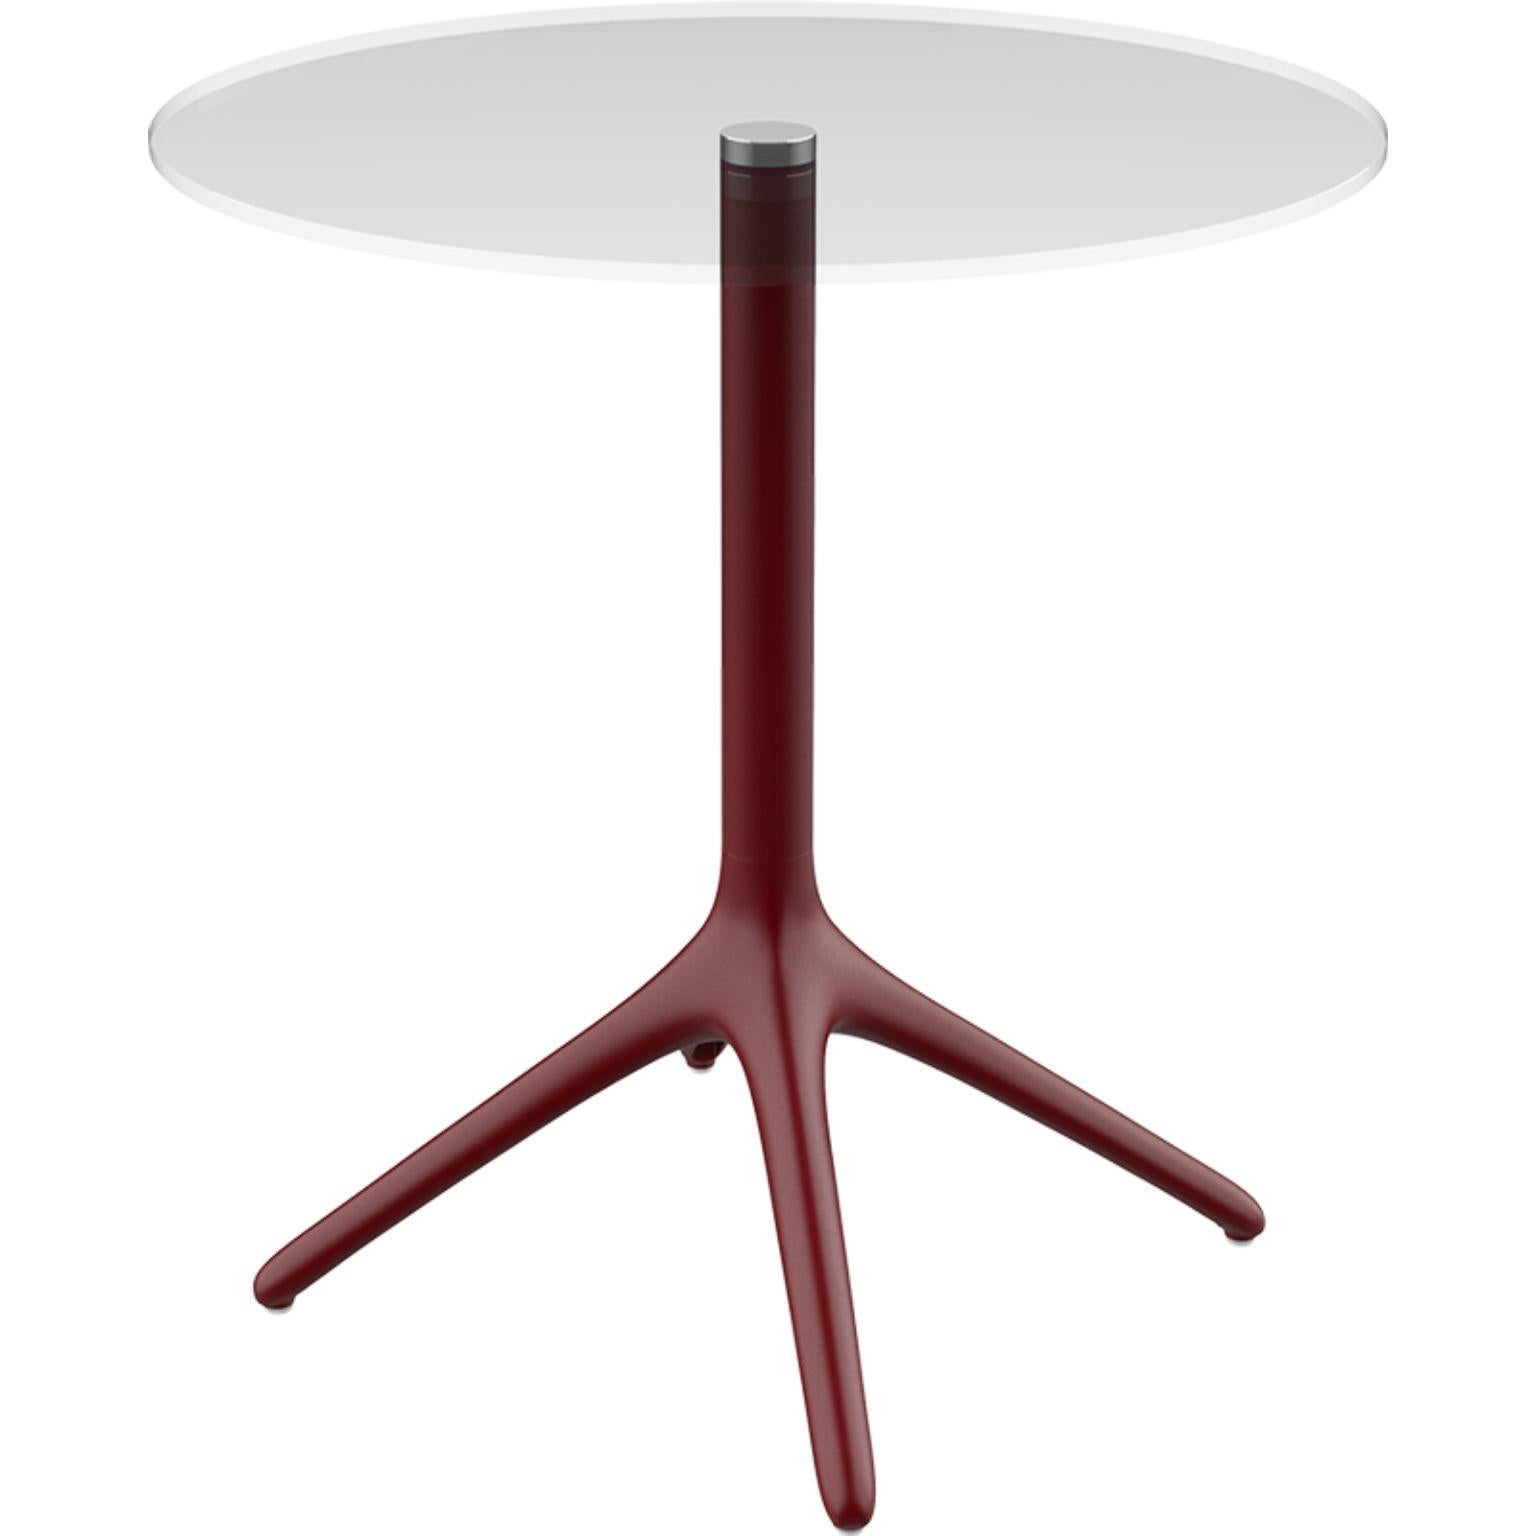 Uni Burgundy table 73 by MOWEE
Dimensions: D 45.5 x H 73 cm
Material: Aluminium, tempered glass
Weight: 5.5 kg
Also available in different colours and finishes. Collapsable version available.

A table designed to be as versatile as possible